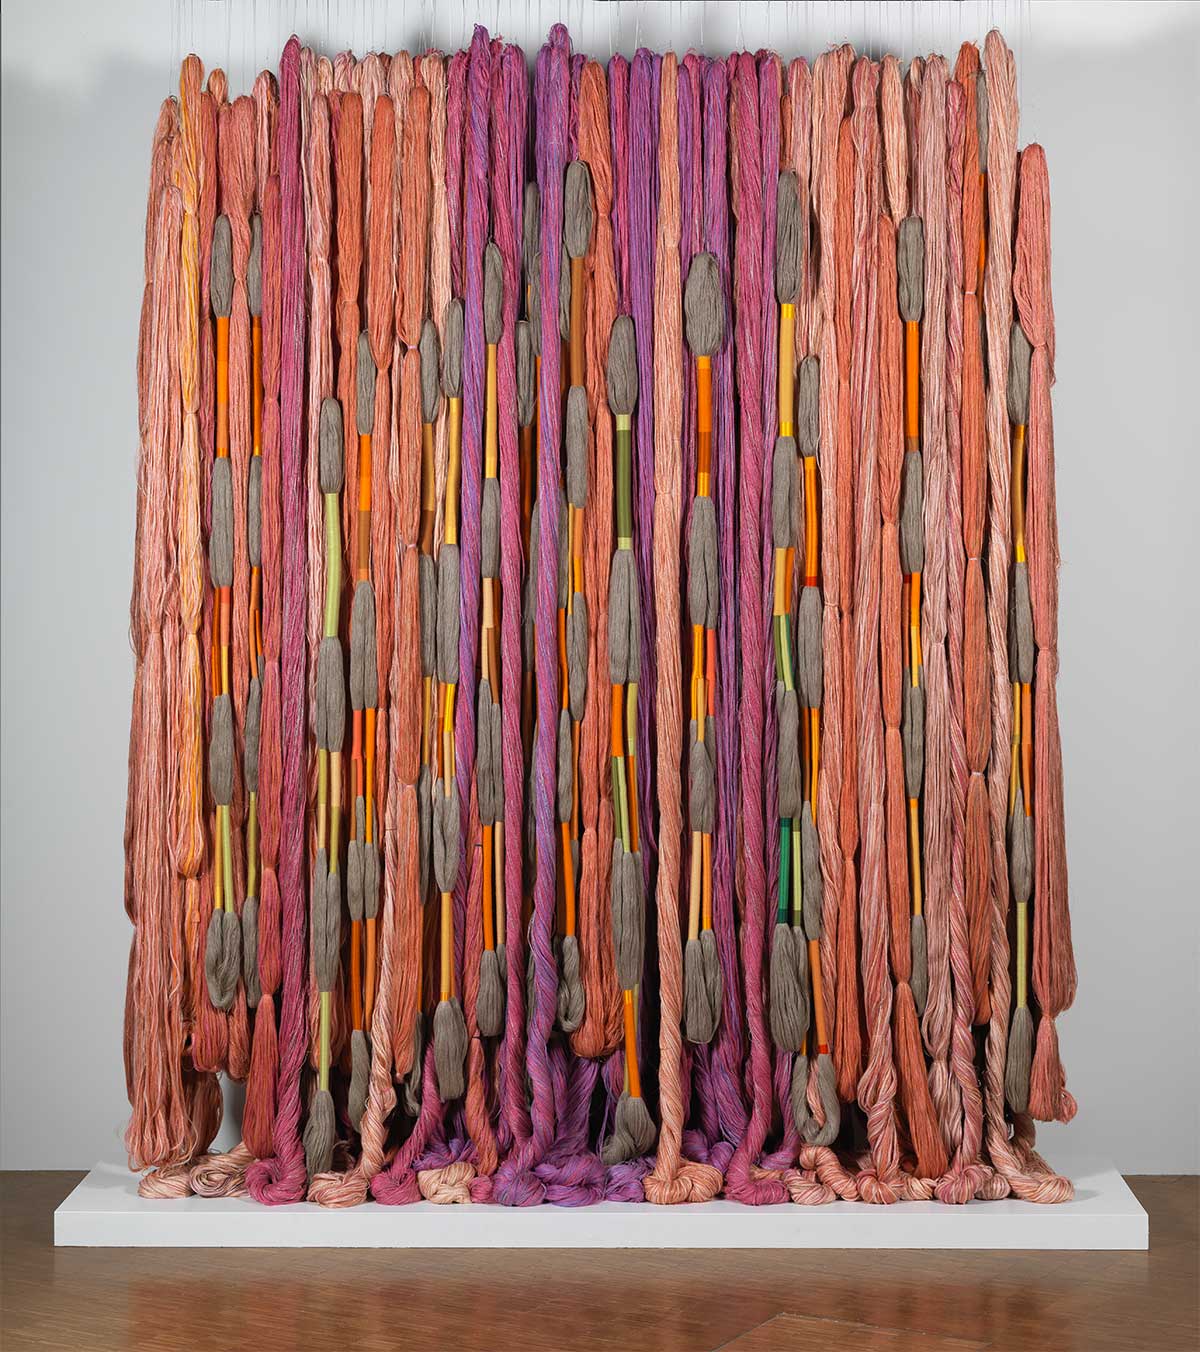 Sheila Hicks, Travelling Threads at the Centre Pompidou Malaga